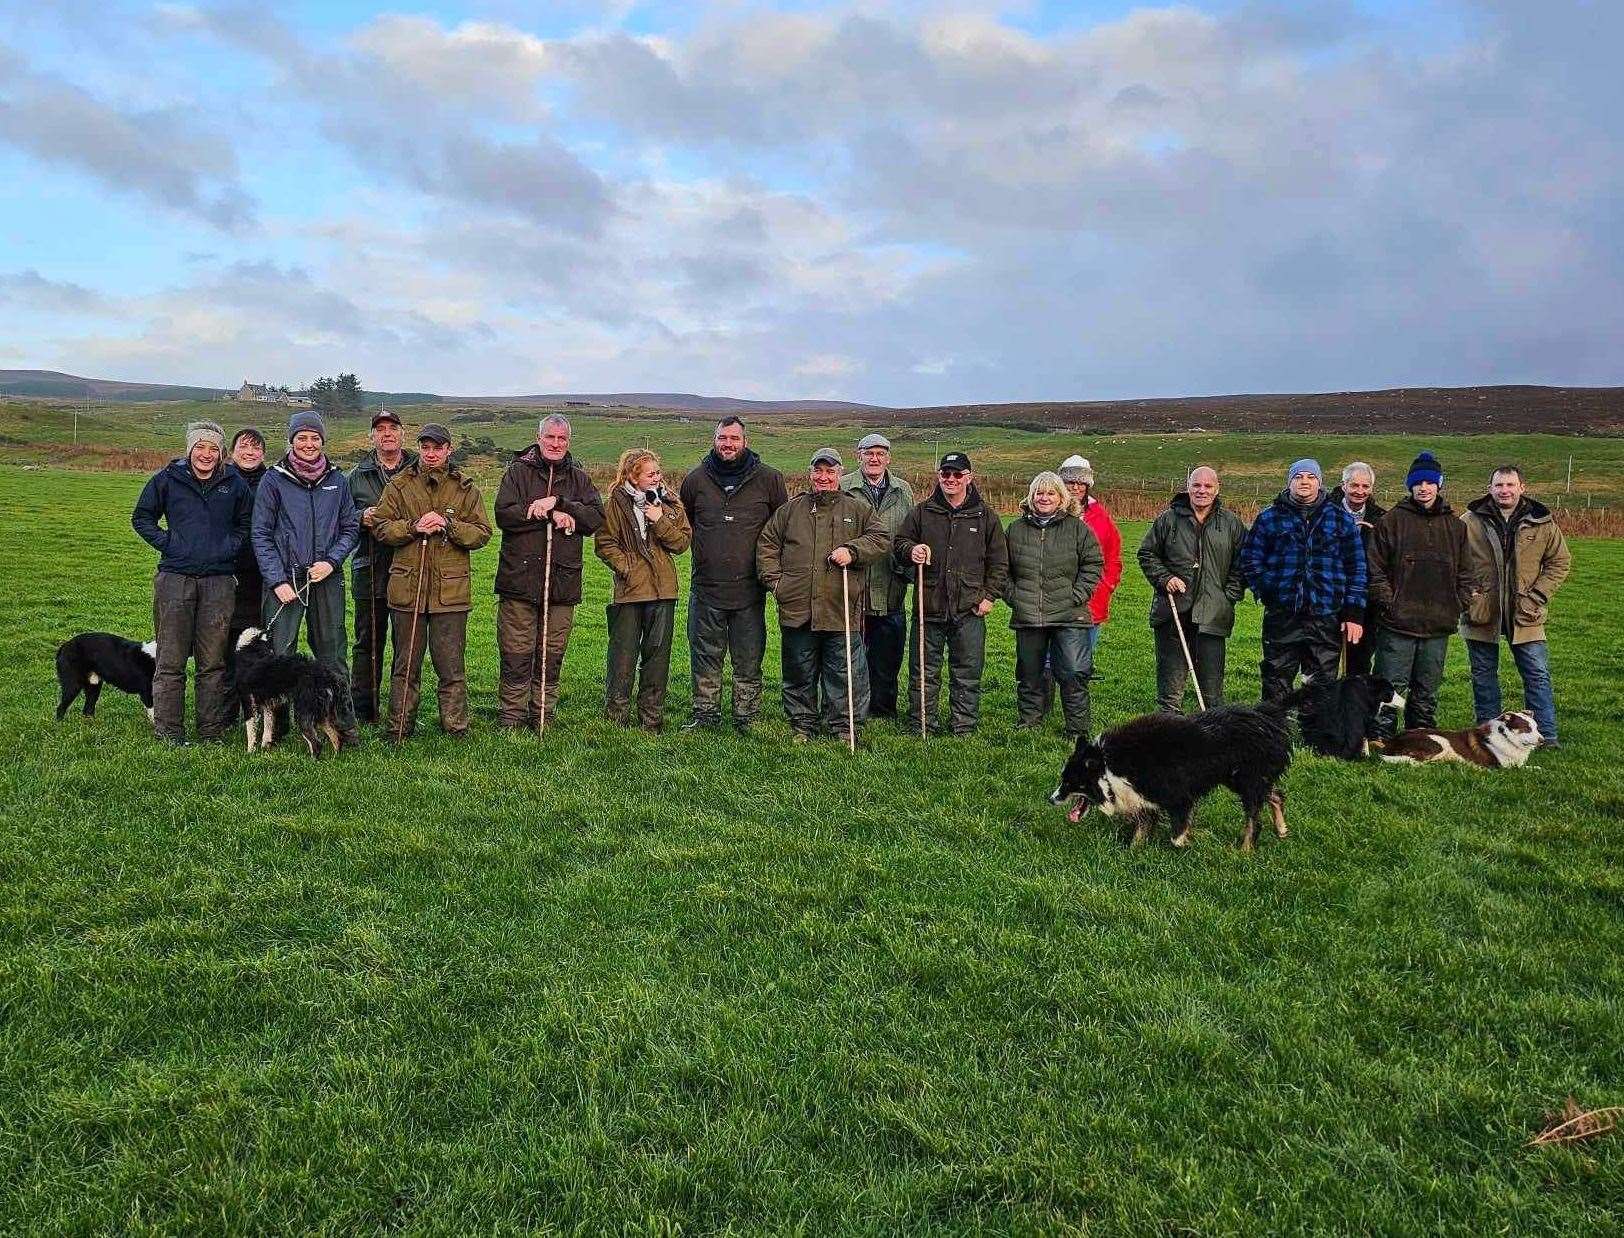 A group picture of all the competitors who took part in the novice dog trials at Kirkton Farm, Melvich.